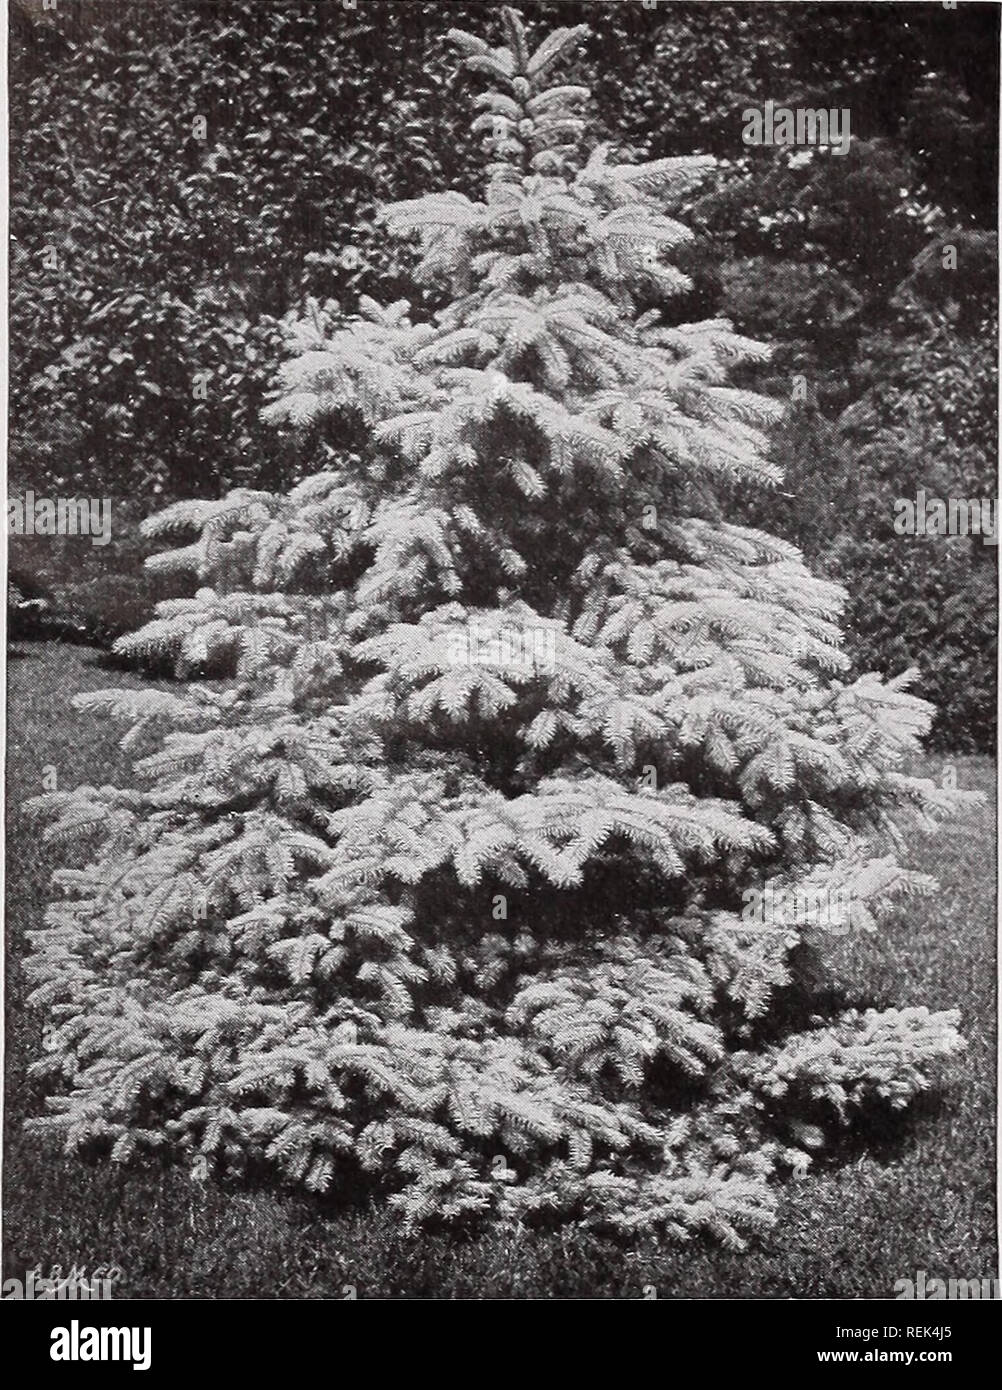 . C. M. Hobbs &amp; Sons. Nurseries Horticulture Catalogs; Evergreens Catalogs; Fruit trees Catalogs; Climbing plants Catalogs; Shrubs Catalogs; Flowers Catalogs; Vegetables Catalogs. Savin Juniper.. Colorado Blue Spruce. Thread-branched Japan Cypress (var. filifera) —Of unique and showy habit, always notice- able. The leading shoot grows upright, the branches are nearly horizontal, with long, drooping, tasseled ends. Pyramidal in out- line; bright green. Var. squarrosa— A handsome, medium-sized lawn tree of dense growth. The silvery blue foliage is almost white when young, almost violet in wi Stock Photo